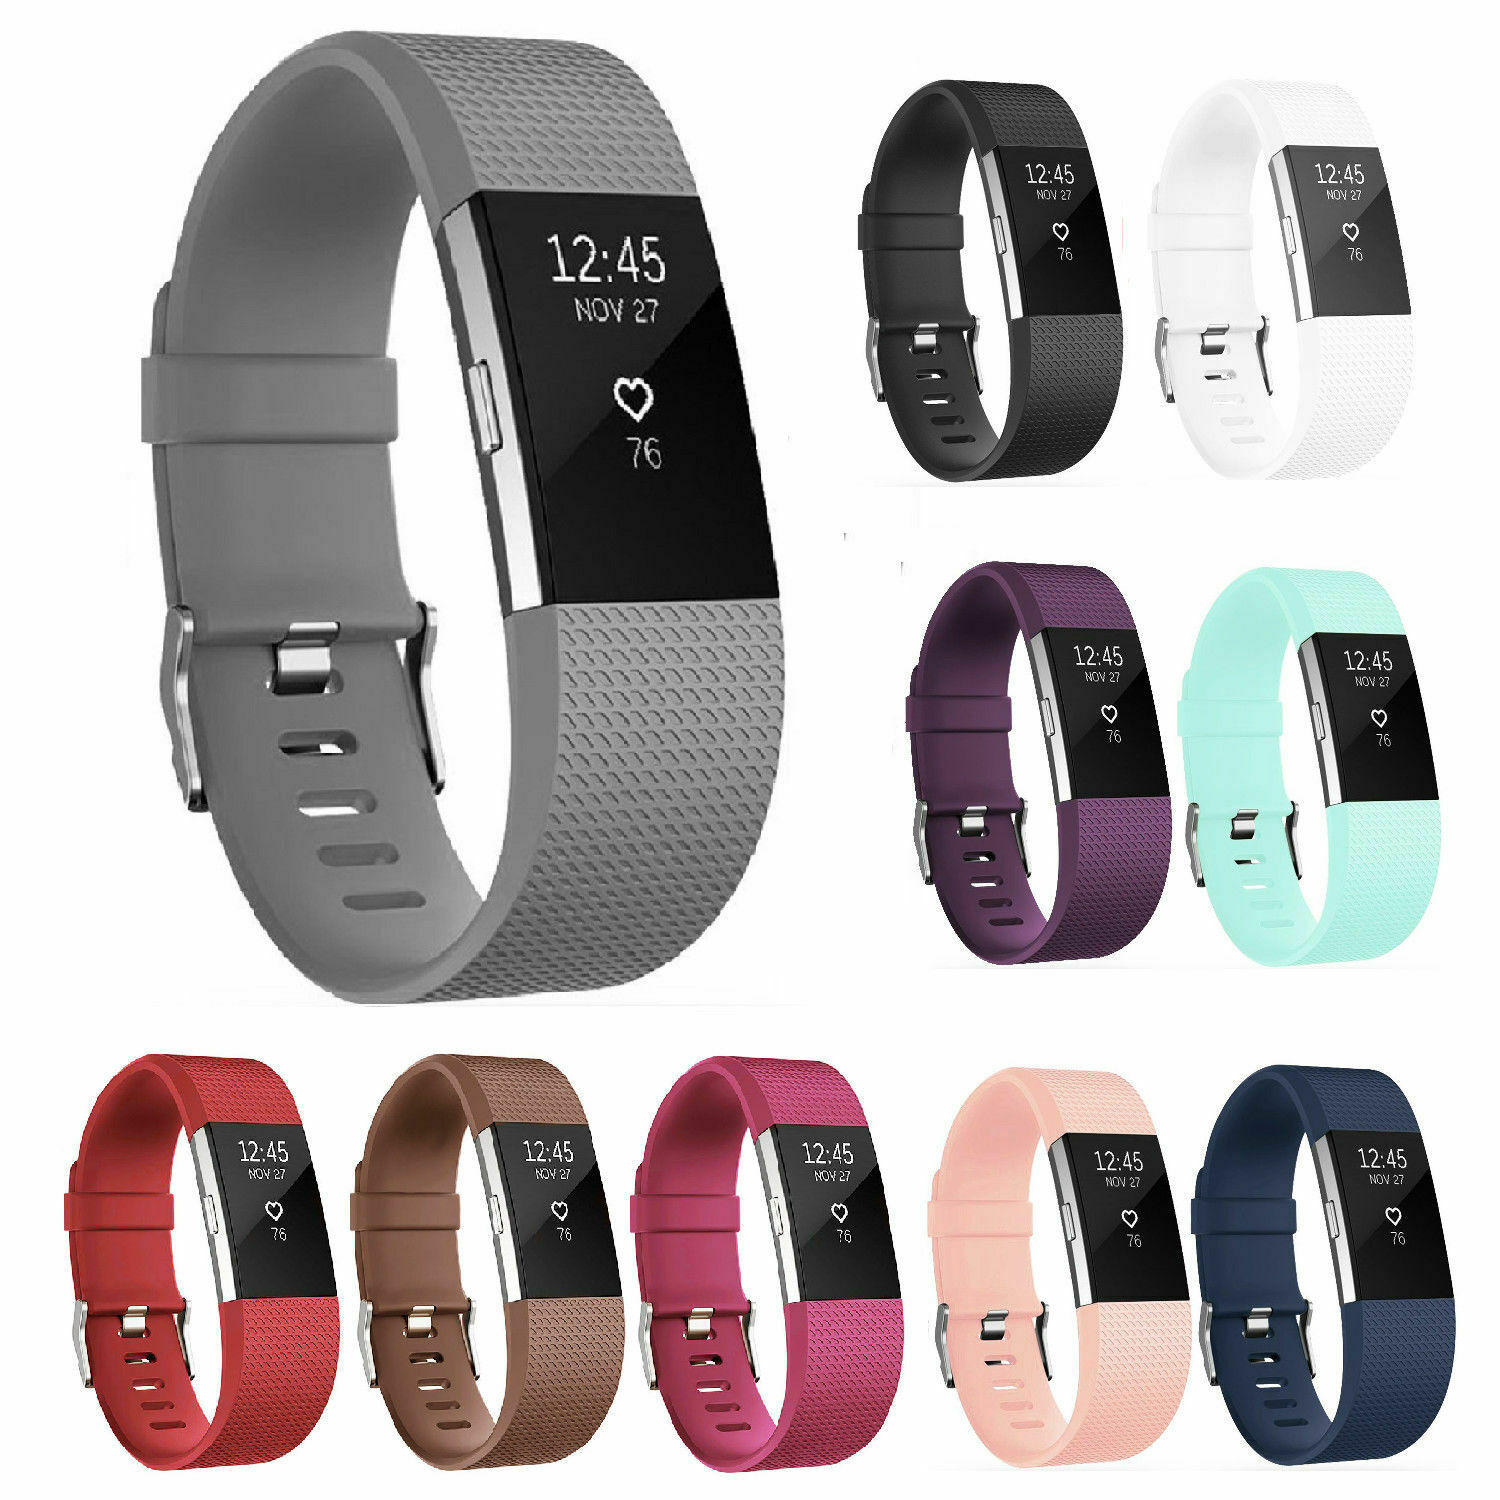 For Oem Fitbit Charge 2 Hr Replacement Band Silicone Bracelet Watch Rate Fitness